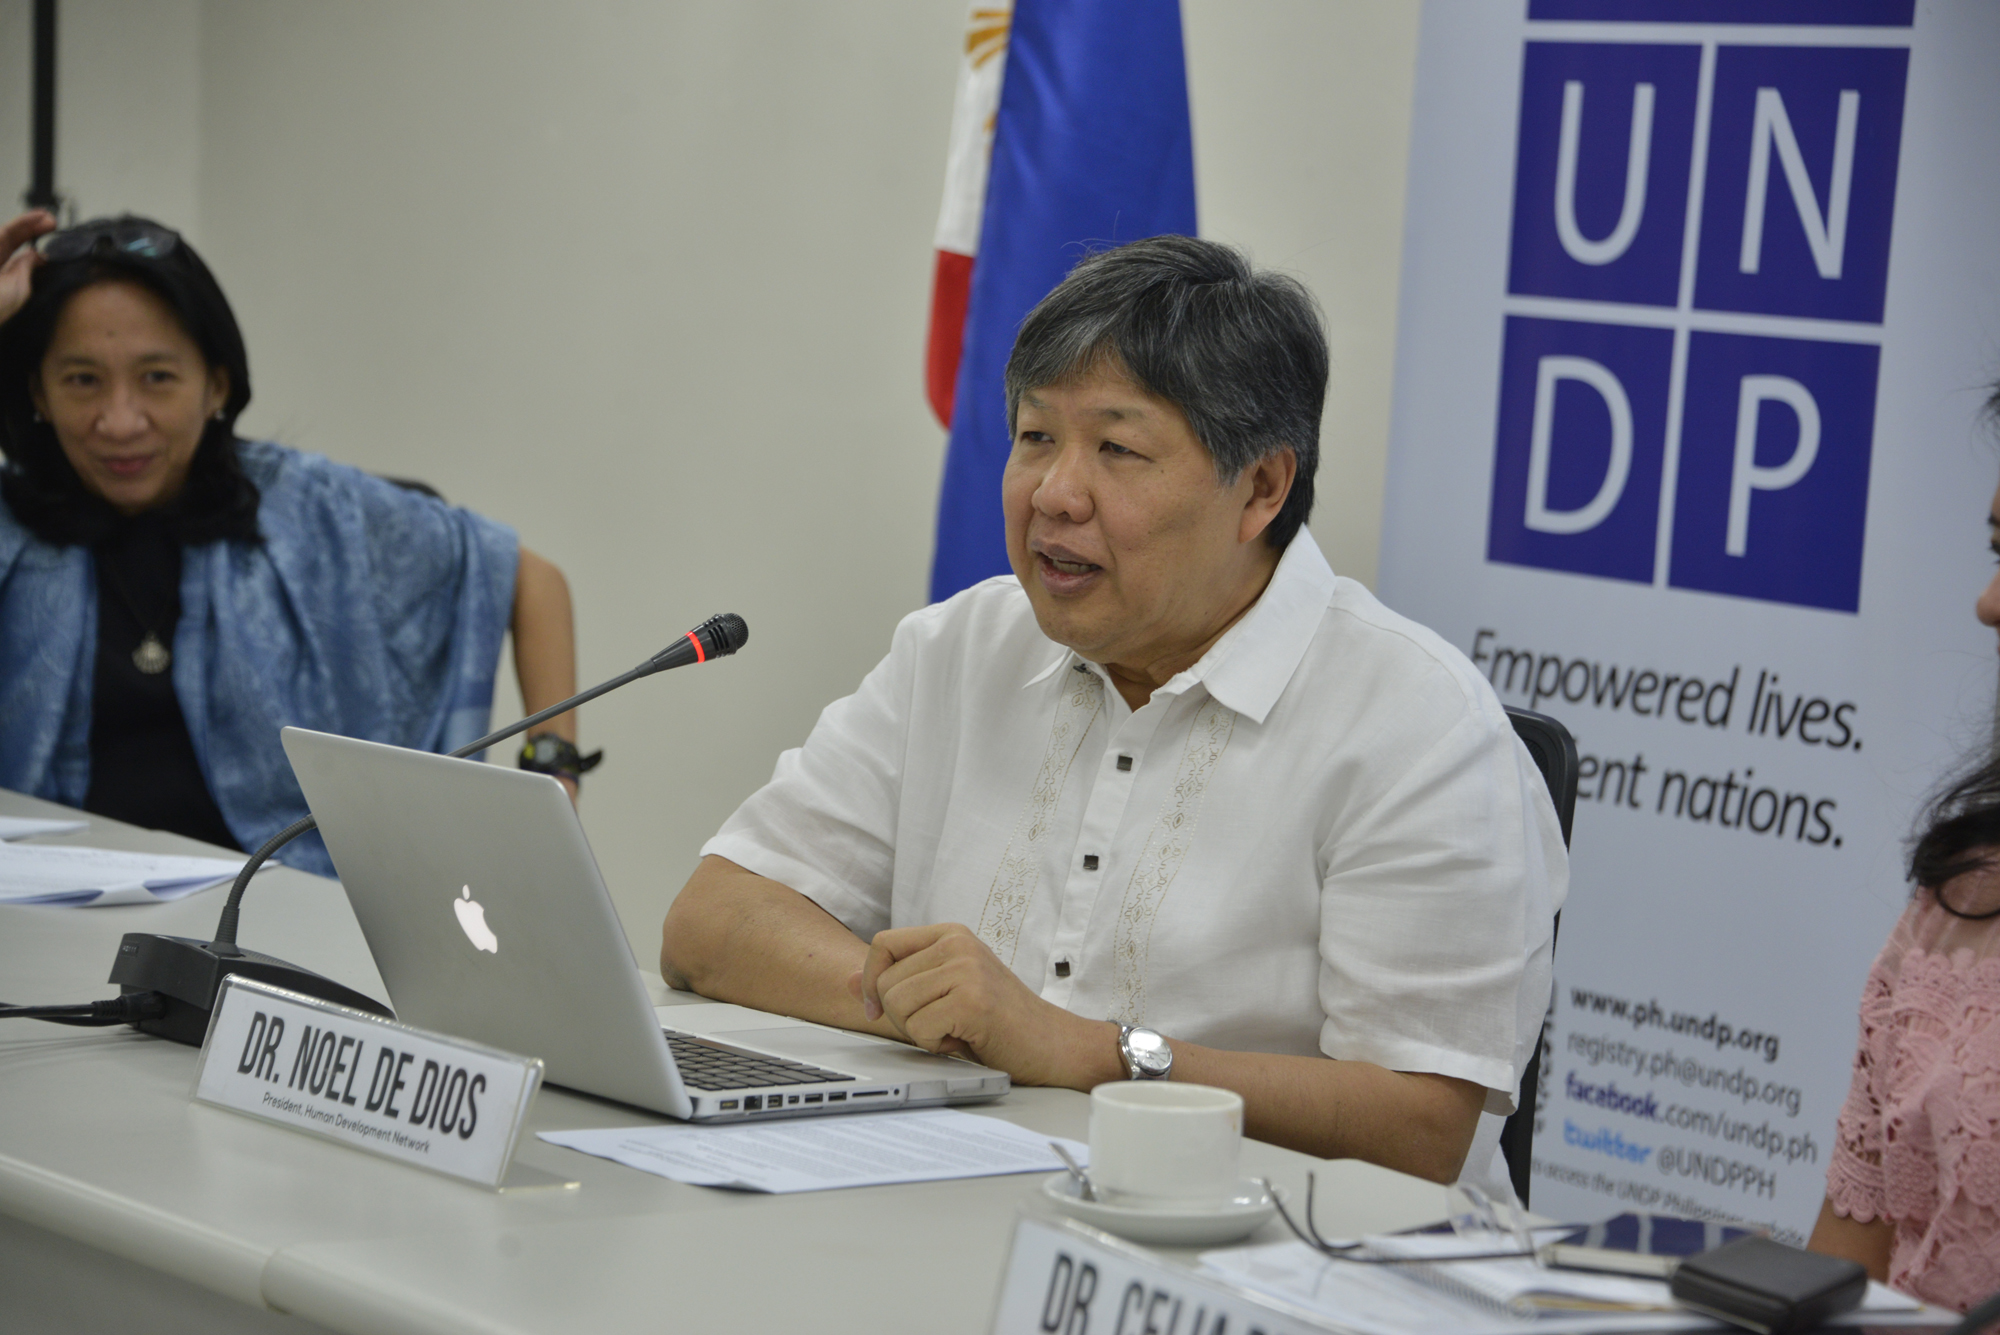 2018 High-Level Policy Dialogue on Meeting the 2030 Global Agenda Pledge to Leave No One Behind in the Philippines-pids-undp-7-20180410.jpg